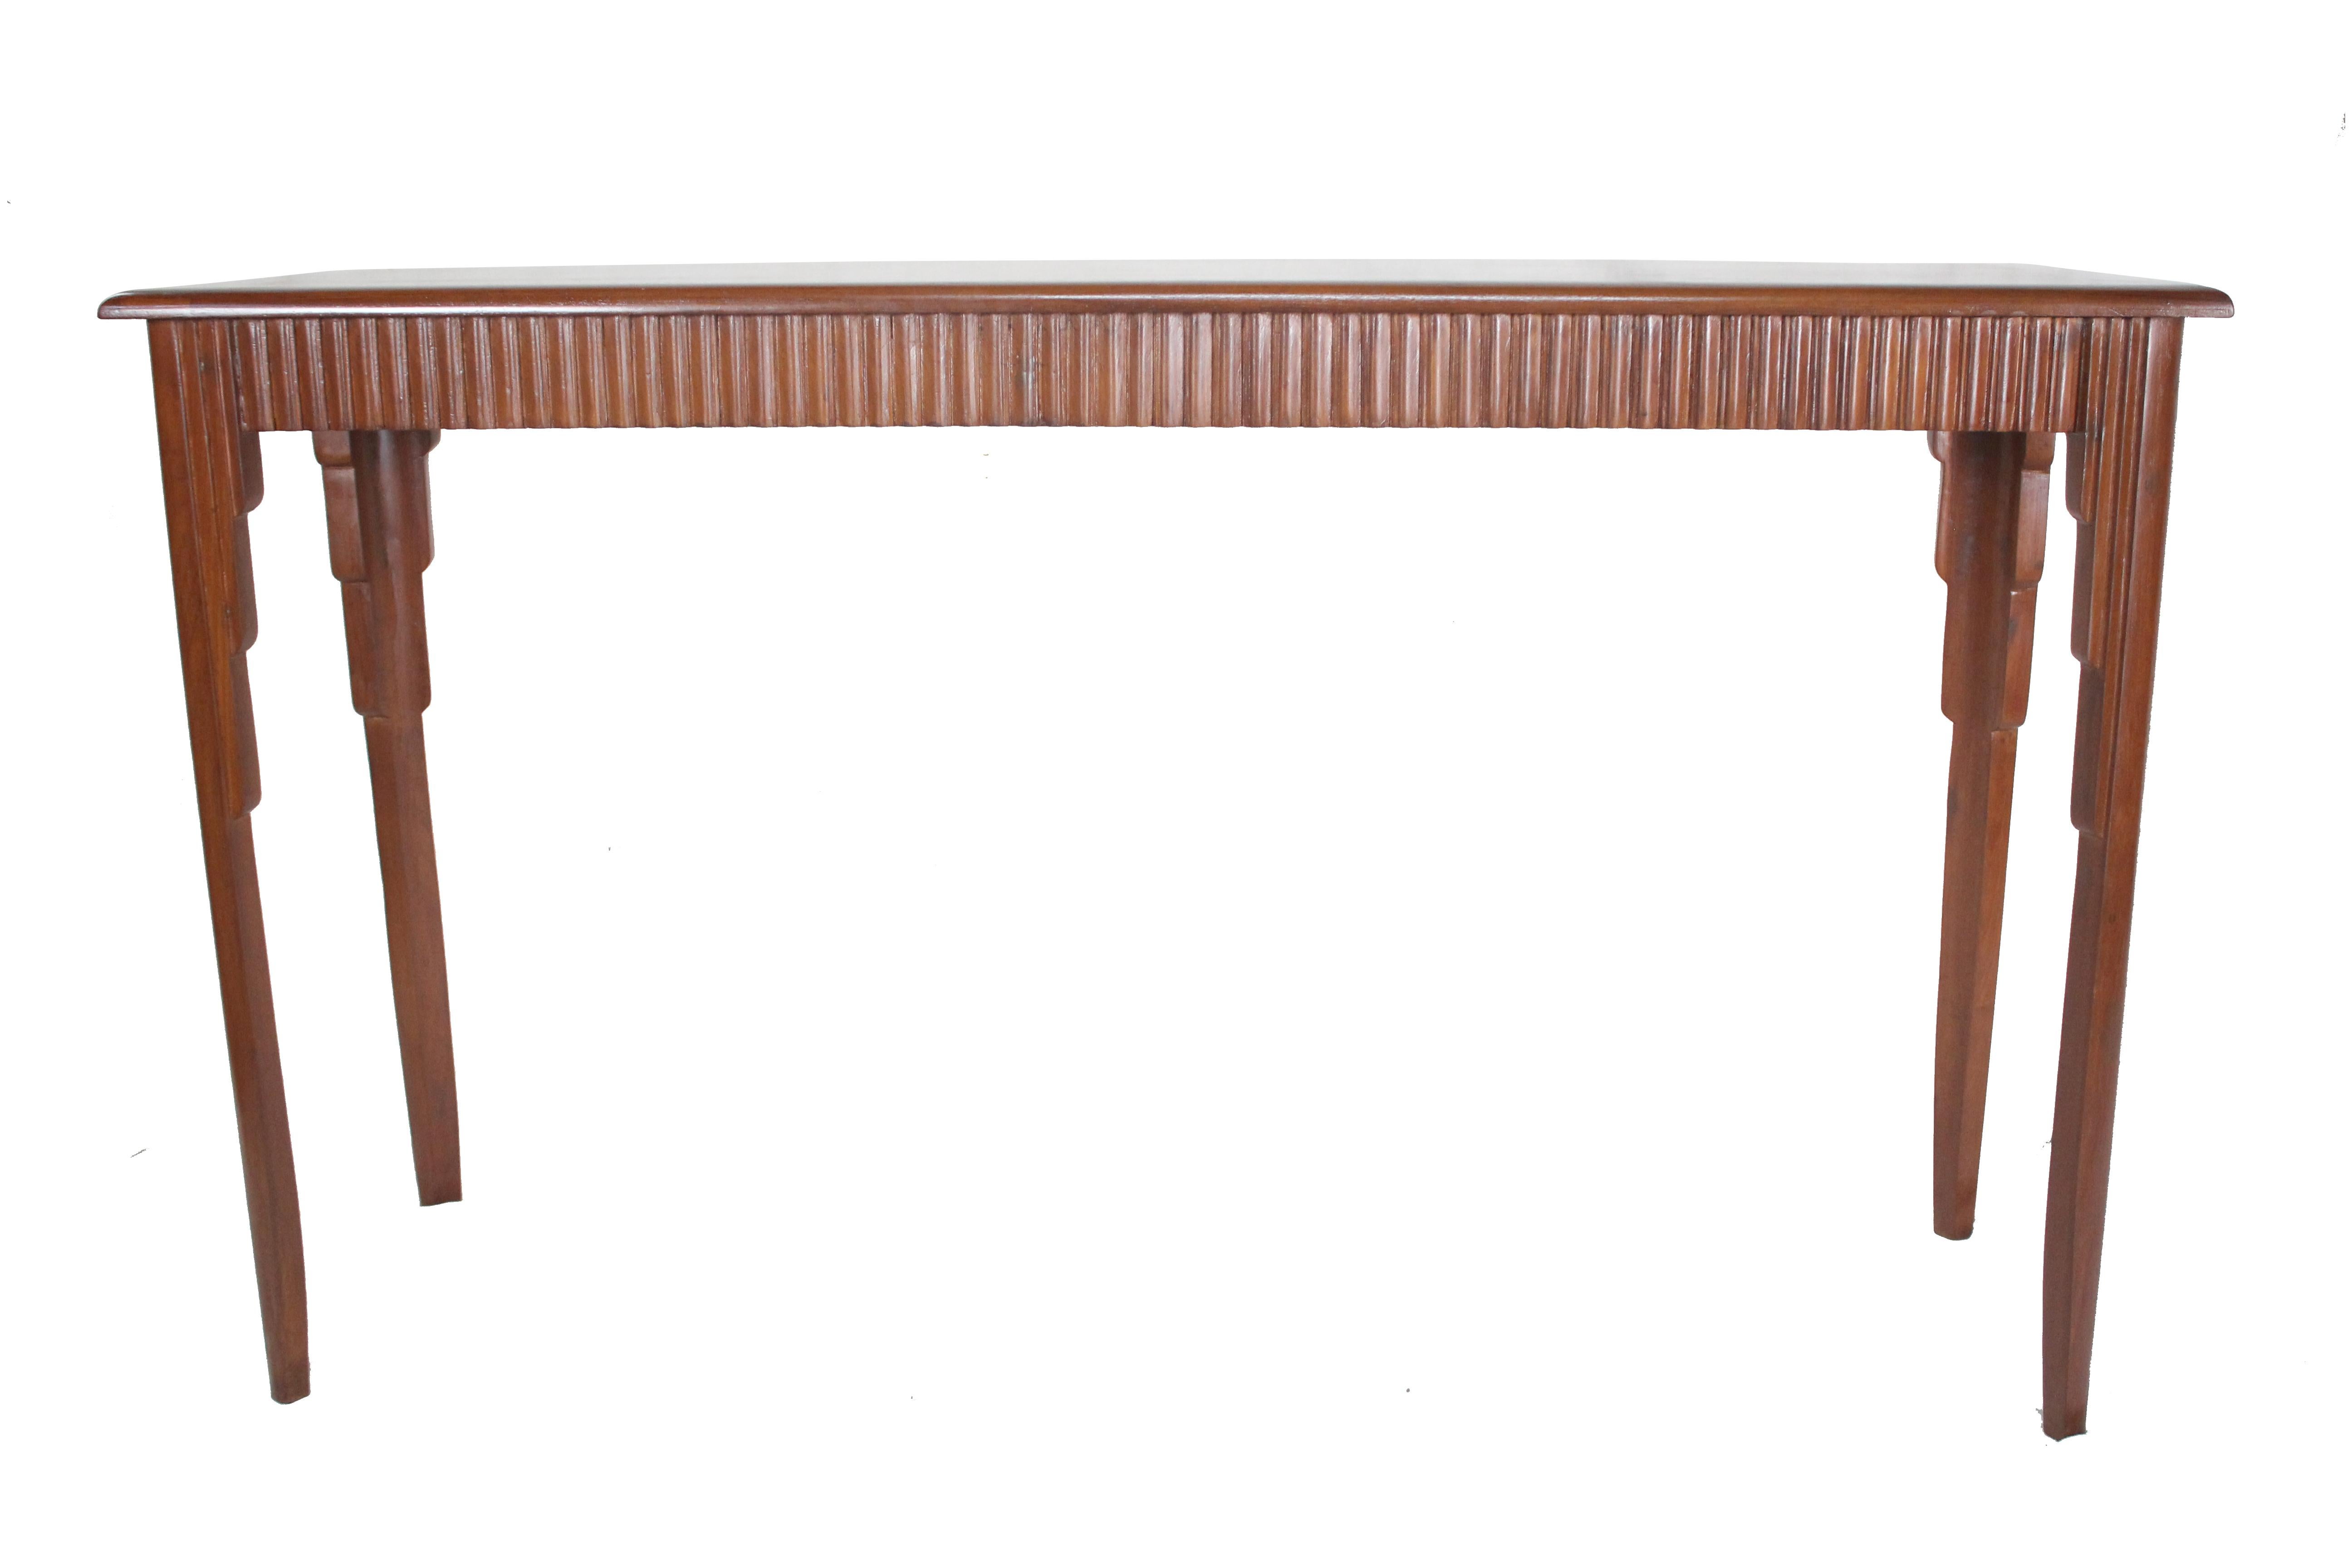 An Art Deco mahogany console or sofa table. Reeded on all four sides with a beveled-edge top, and architecturally beveled and stepped tapered legs. European. Multi functional as a behind the sofa table, a serving piece, or console table.